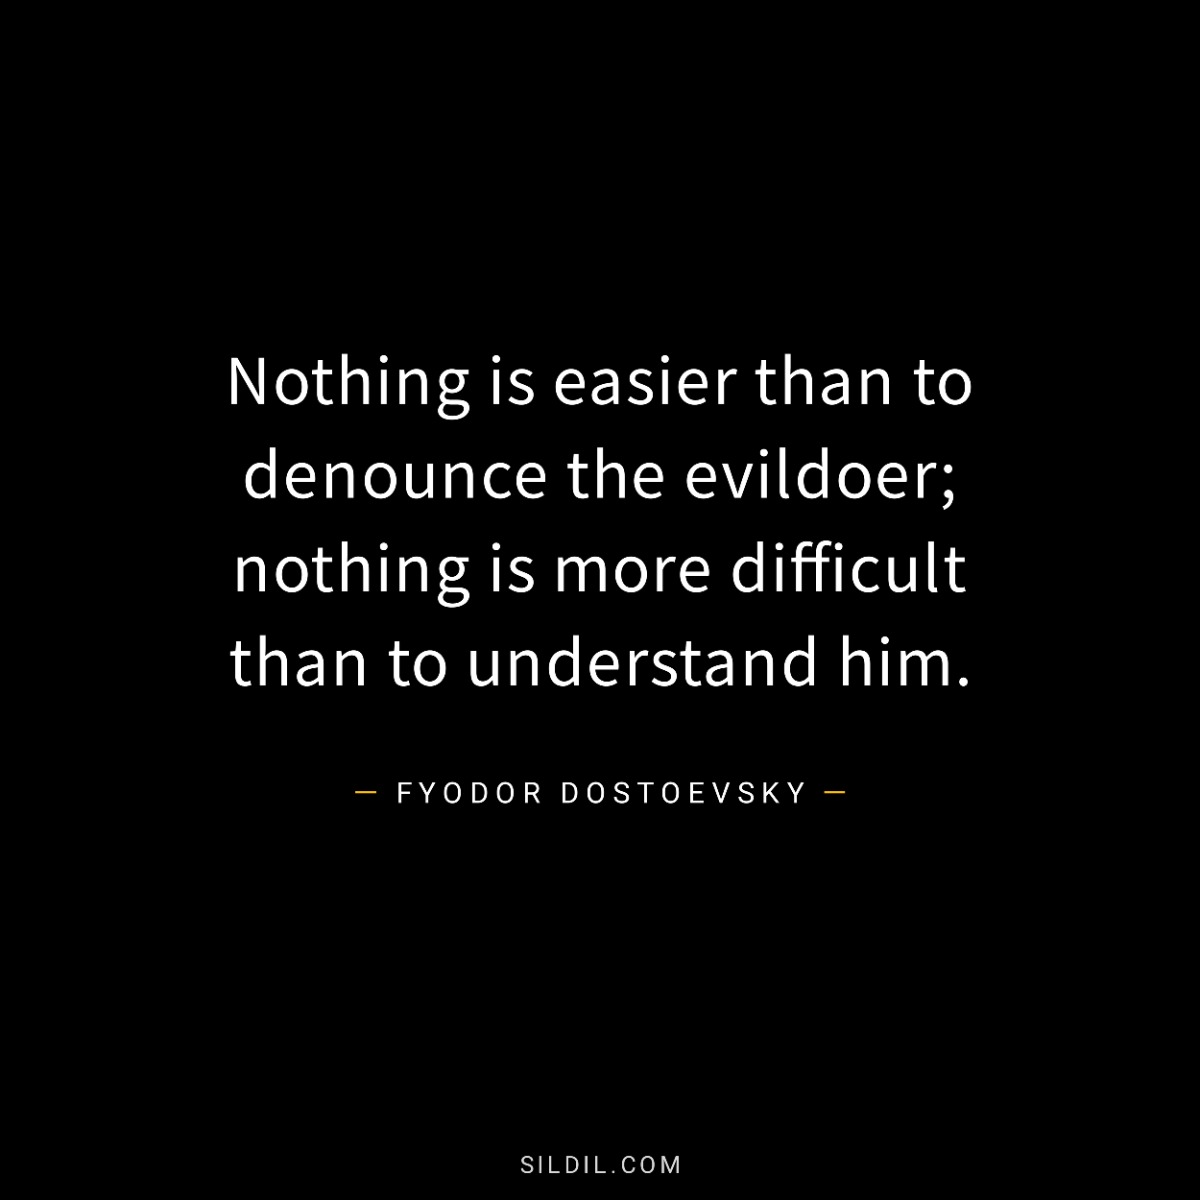 Nothing is easier than to denounce the evildoer; nothing is more difficult than to understand him.